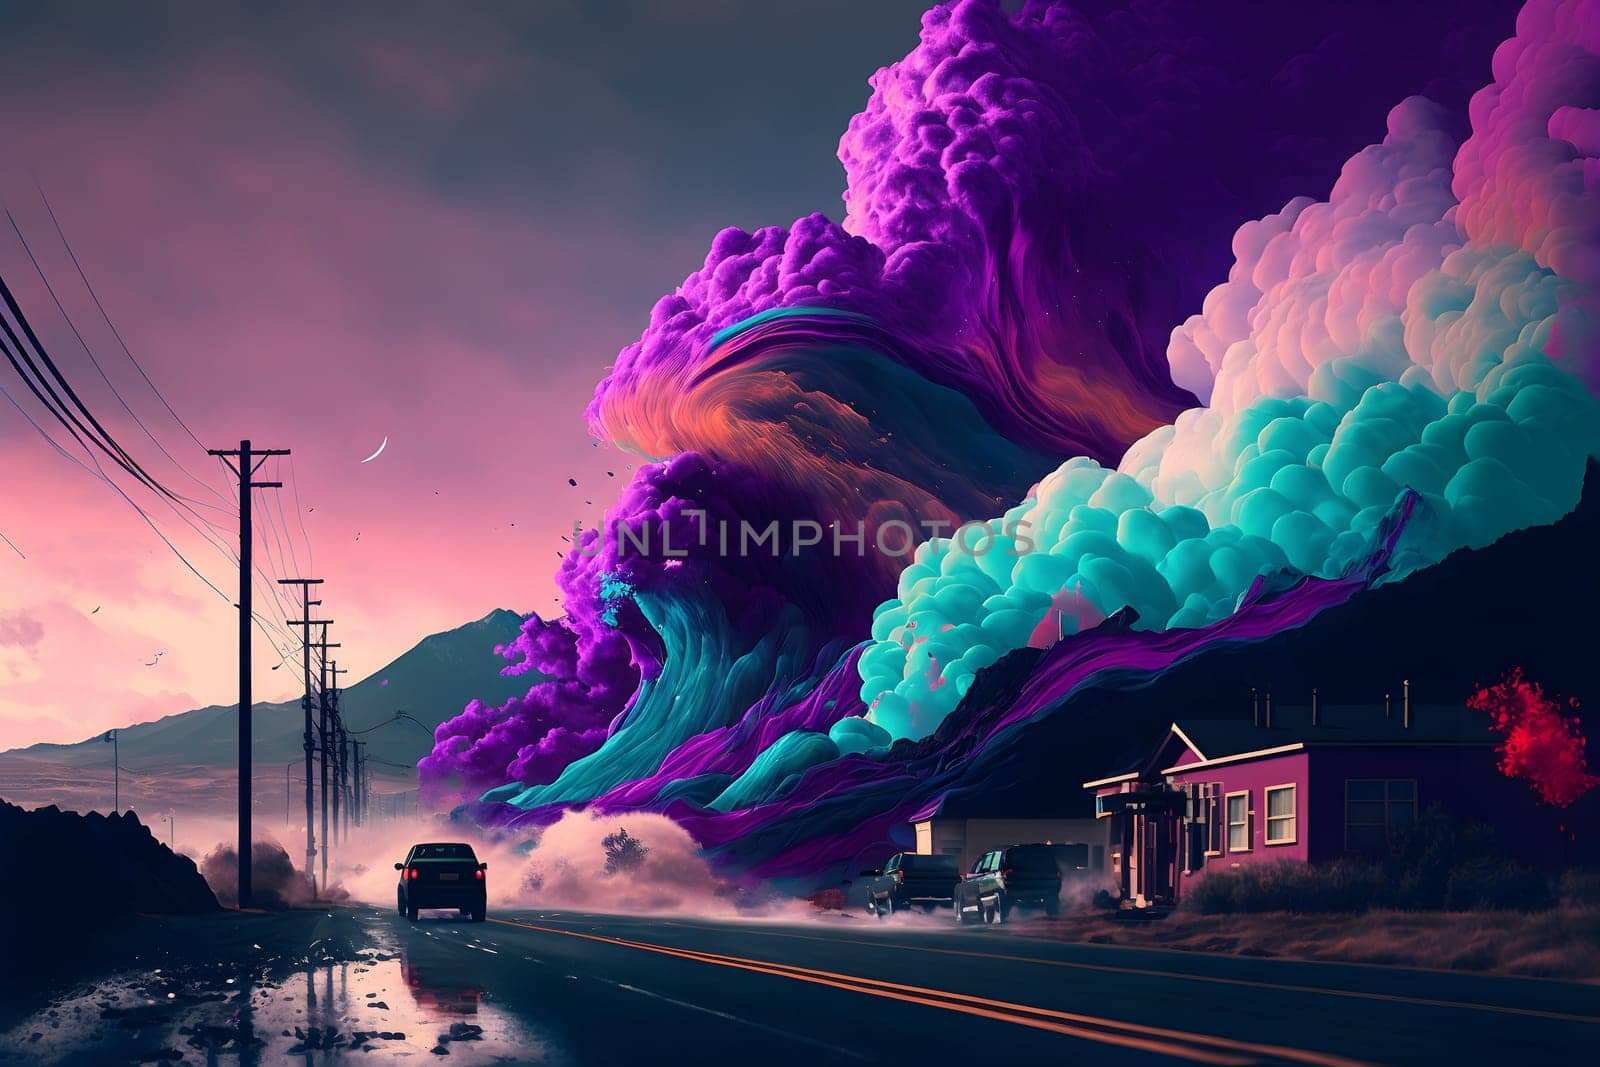 giant colorful vapour waves is about to cover small town houses near highway at sunset, neural network generated art by z1b